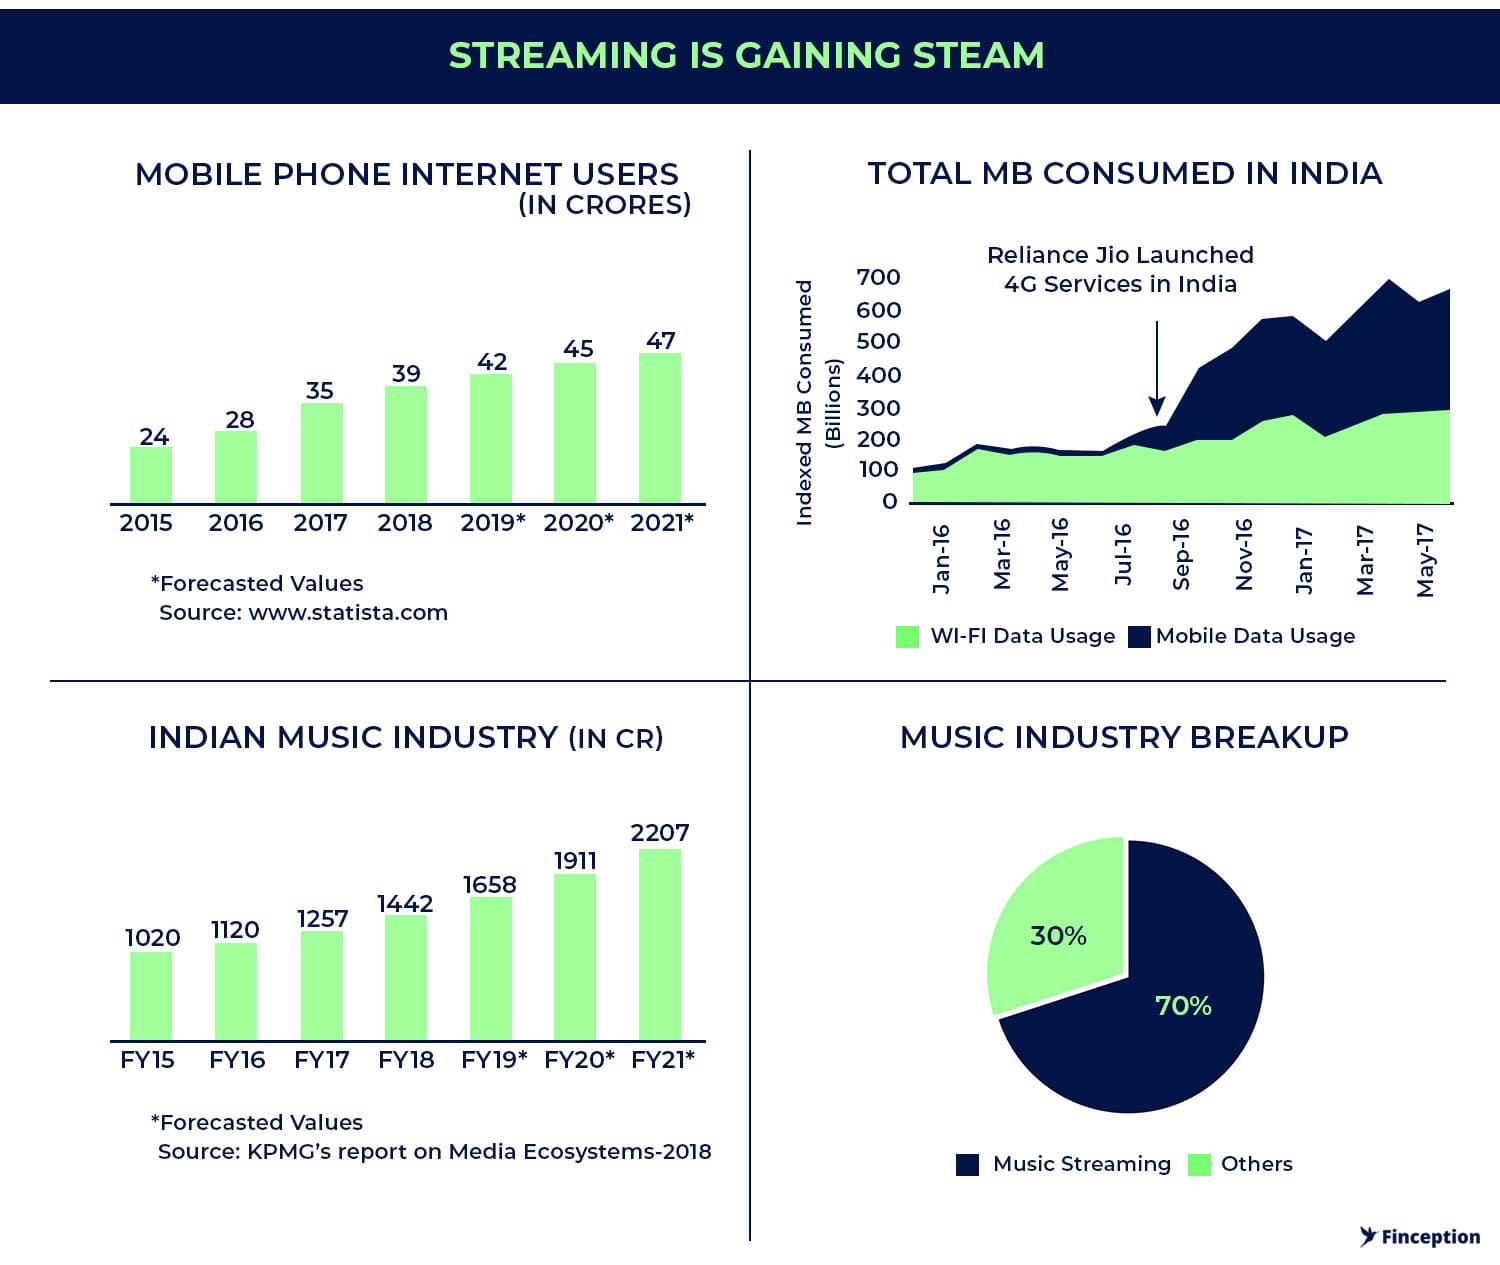 Streaming is growing in India